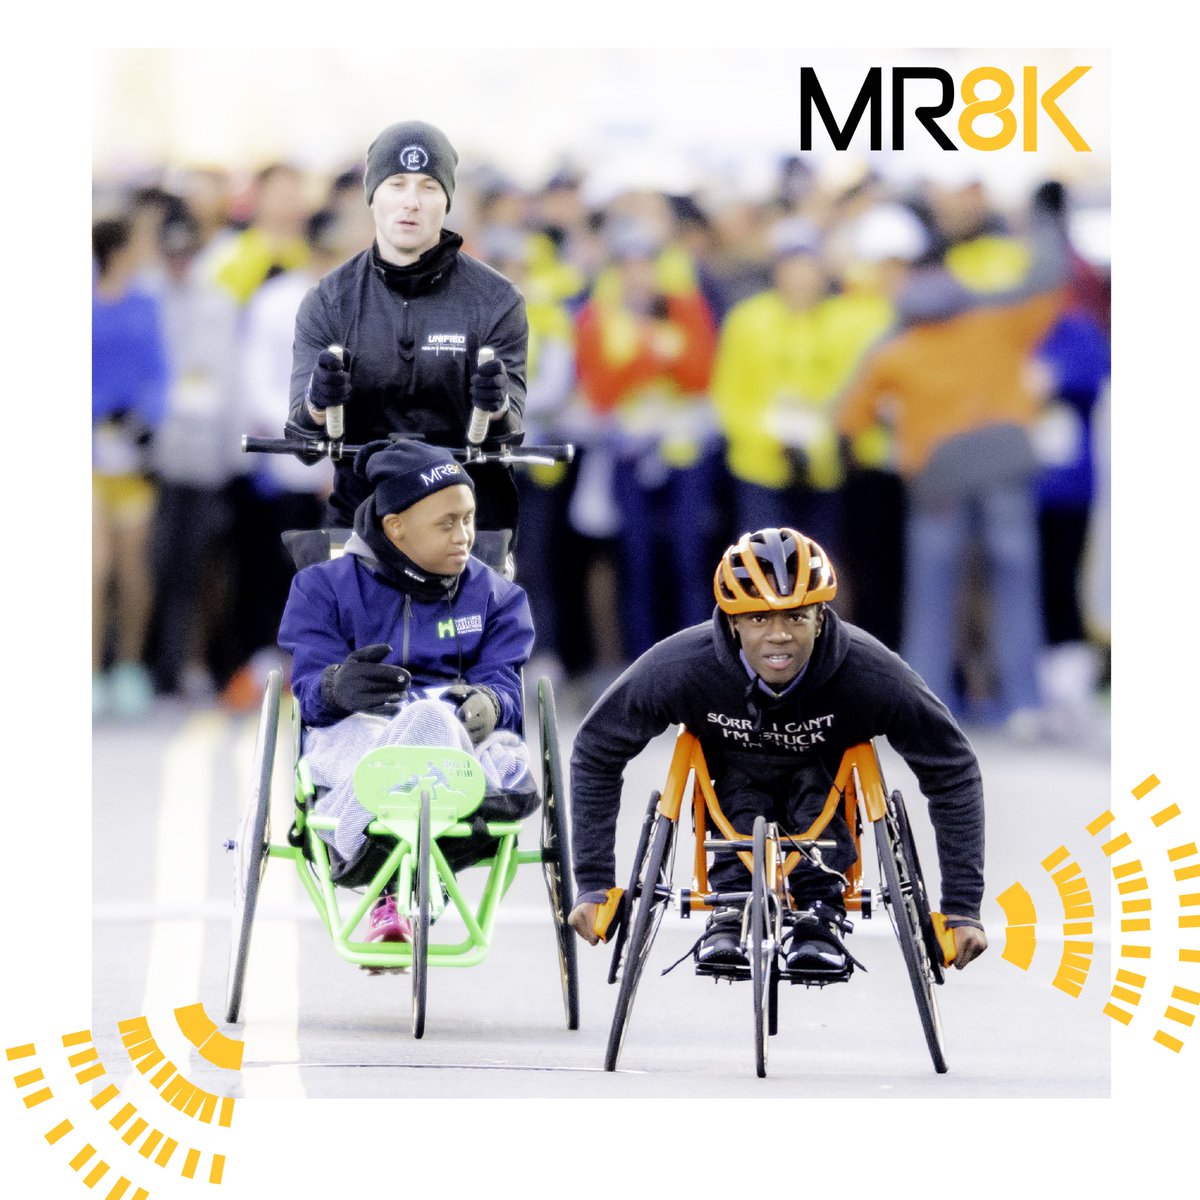 Are you registered yet? There is still time!! Join us TOMORROW for the 6th annual MR8K presented by New Balance and Amazon. For the first time, the 5-mile race will take place in Boston’s Seaport District- Tomorrow, October 15th. Run with Boston’s Team MR8K.org